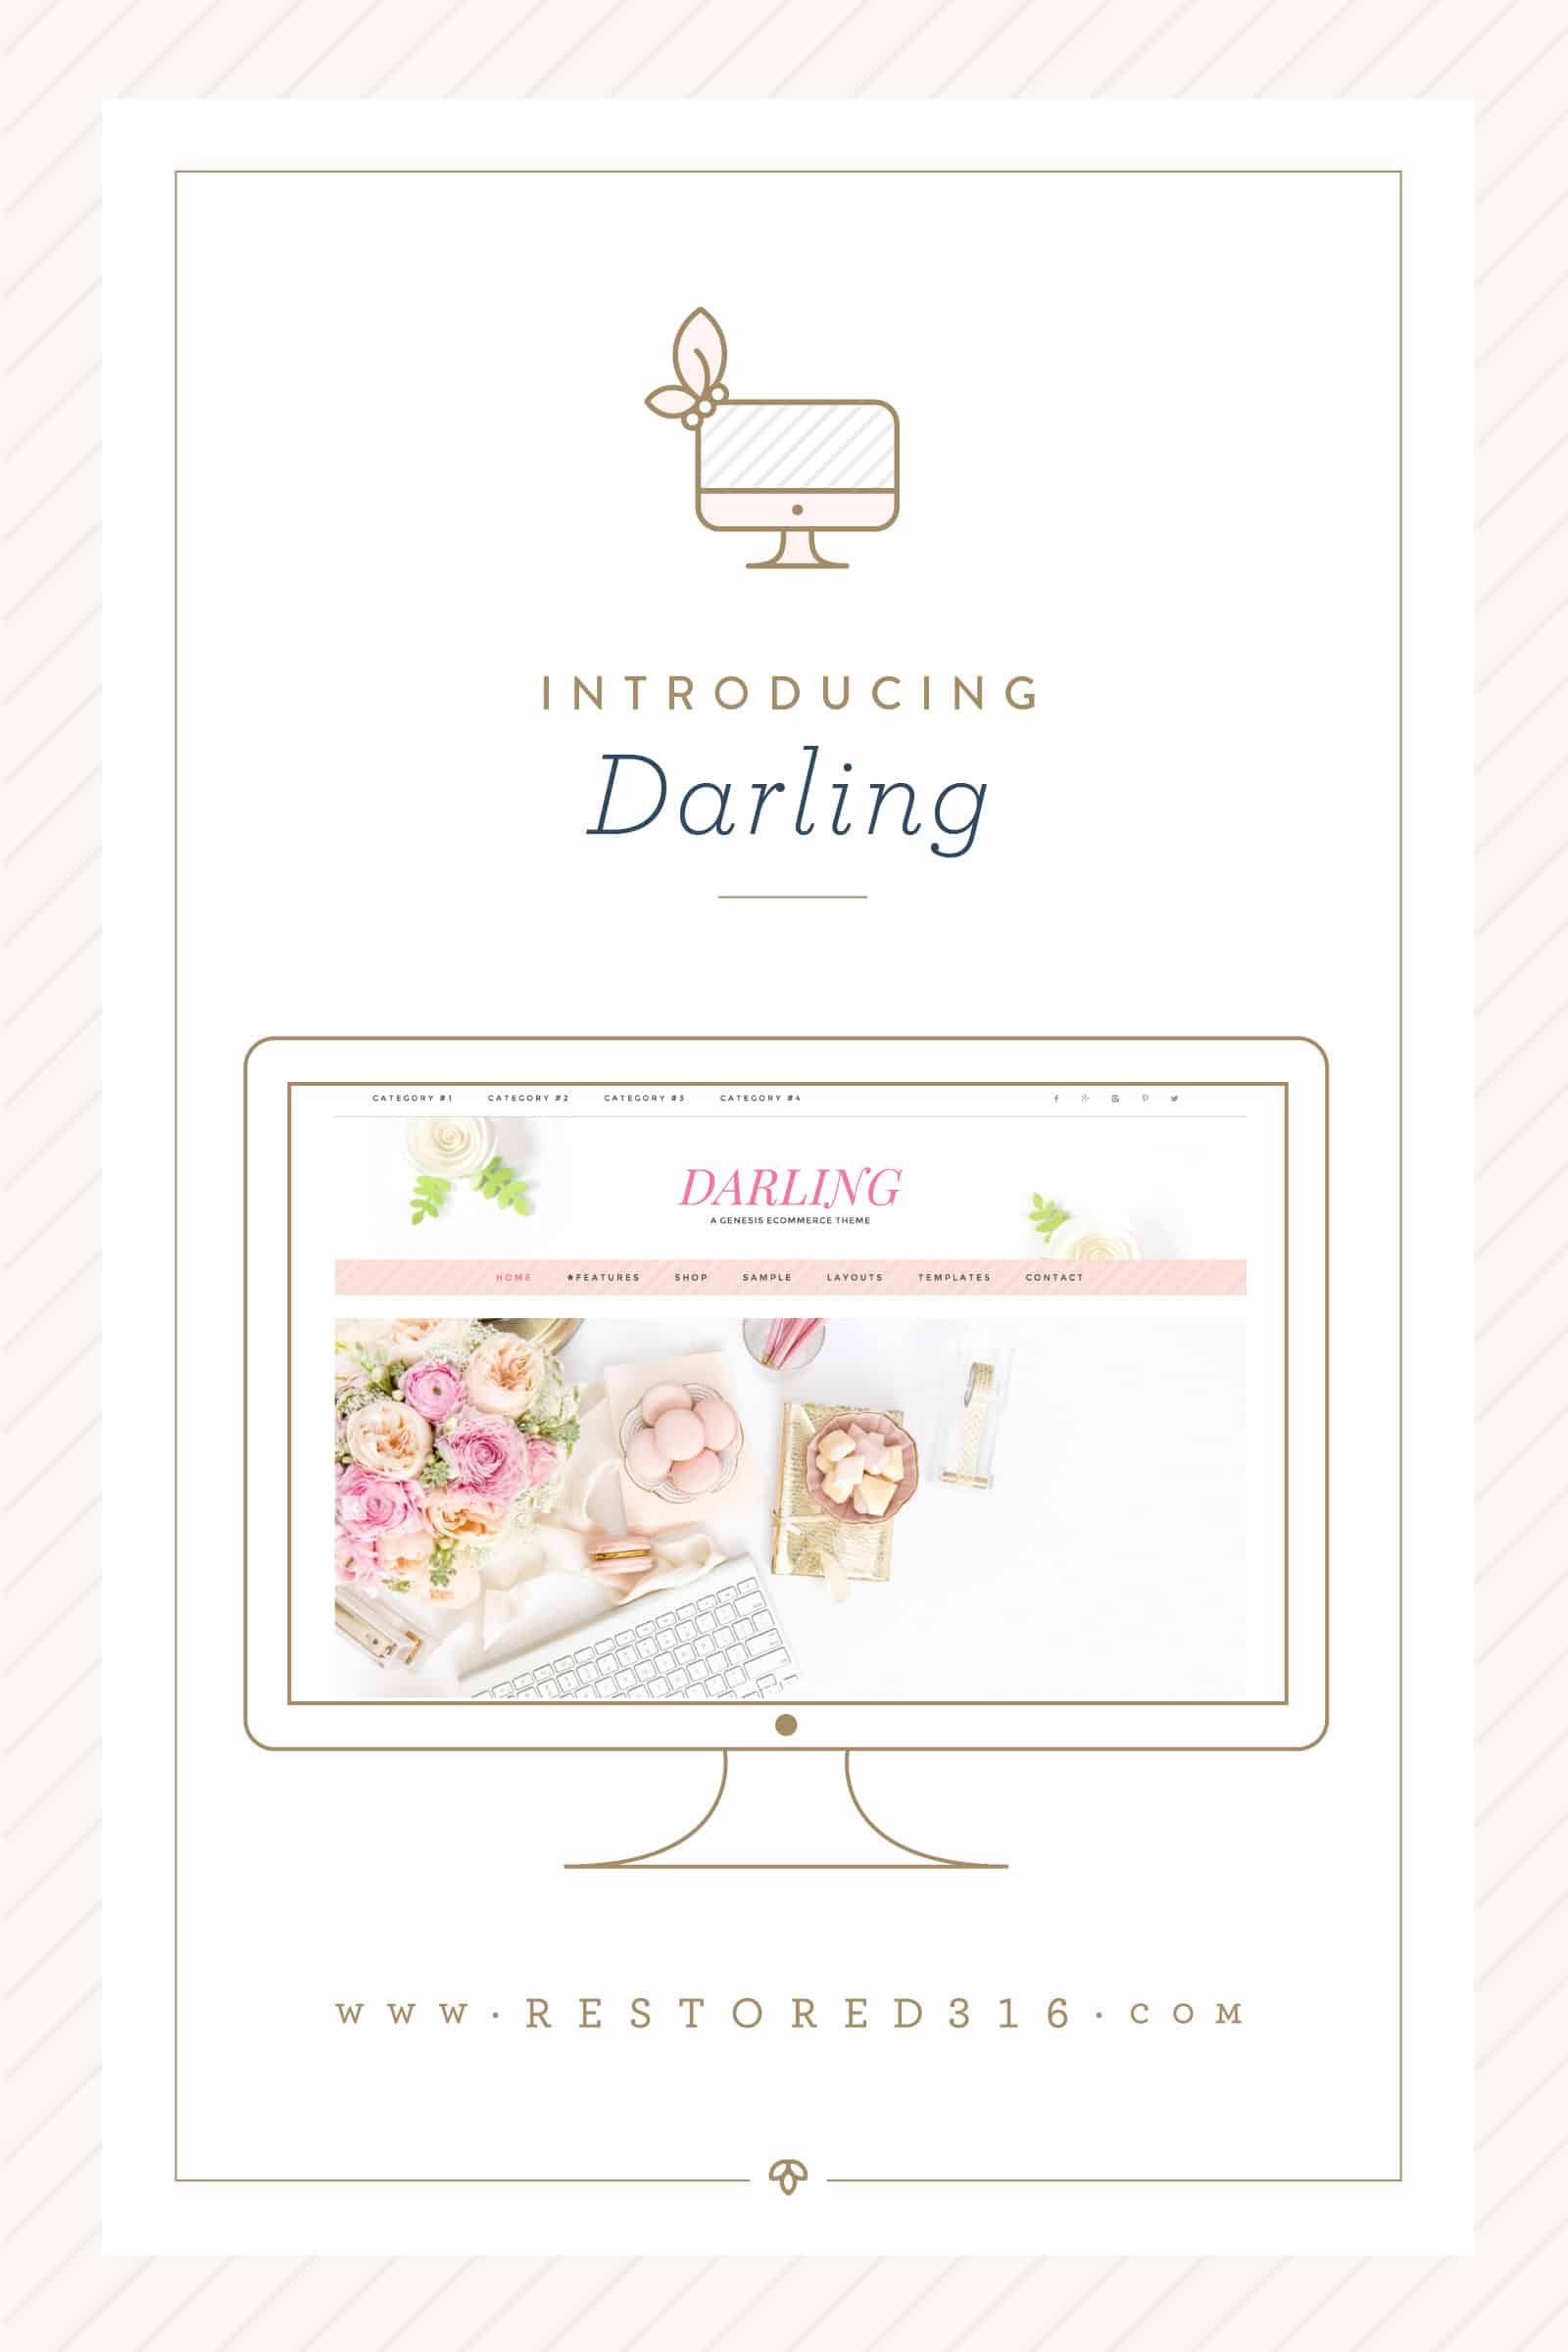 Introducing Darling: An Ecommerce Genesis Theme